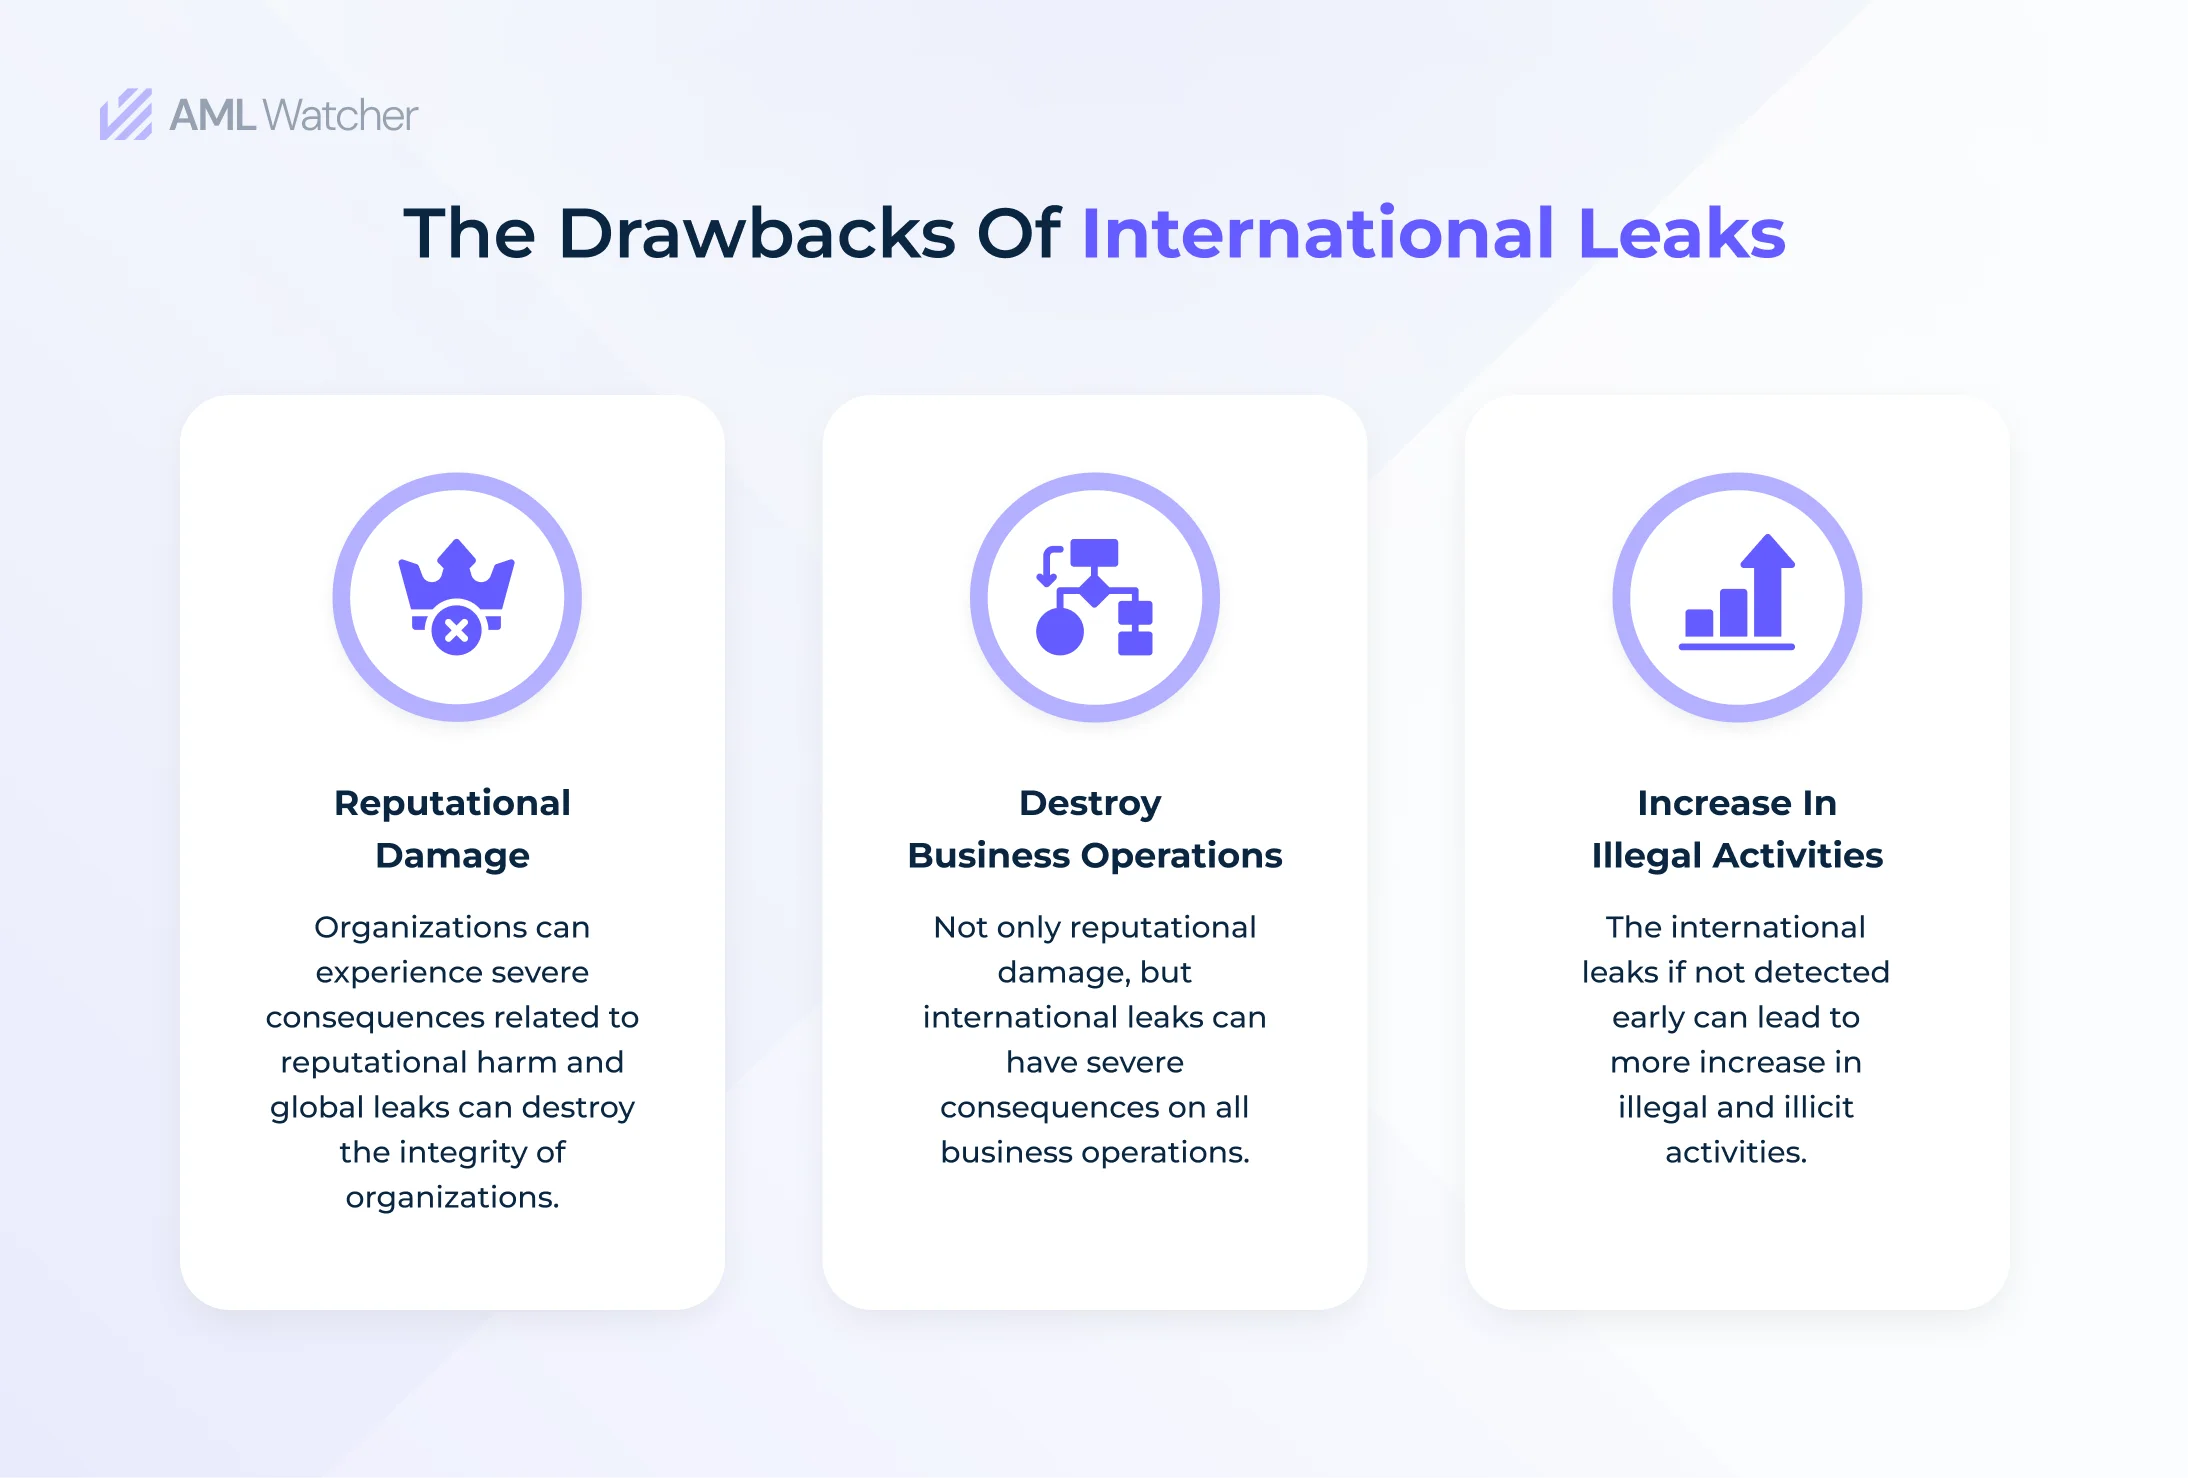 International leaks can have a severe impact on the reputation of the organization.